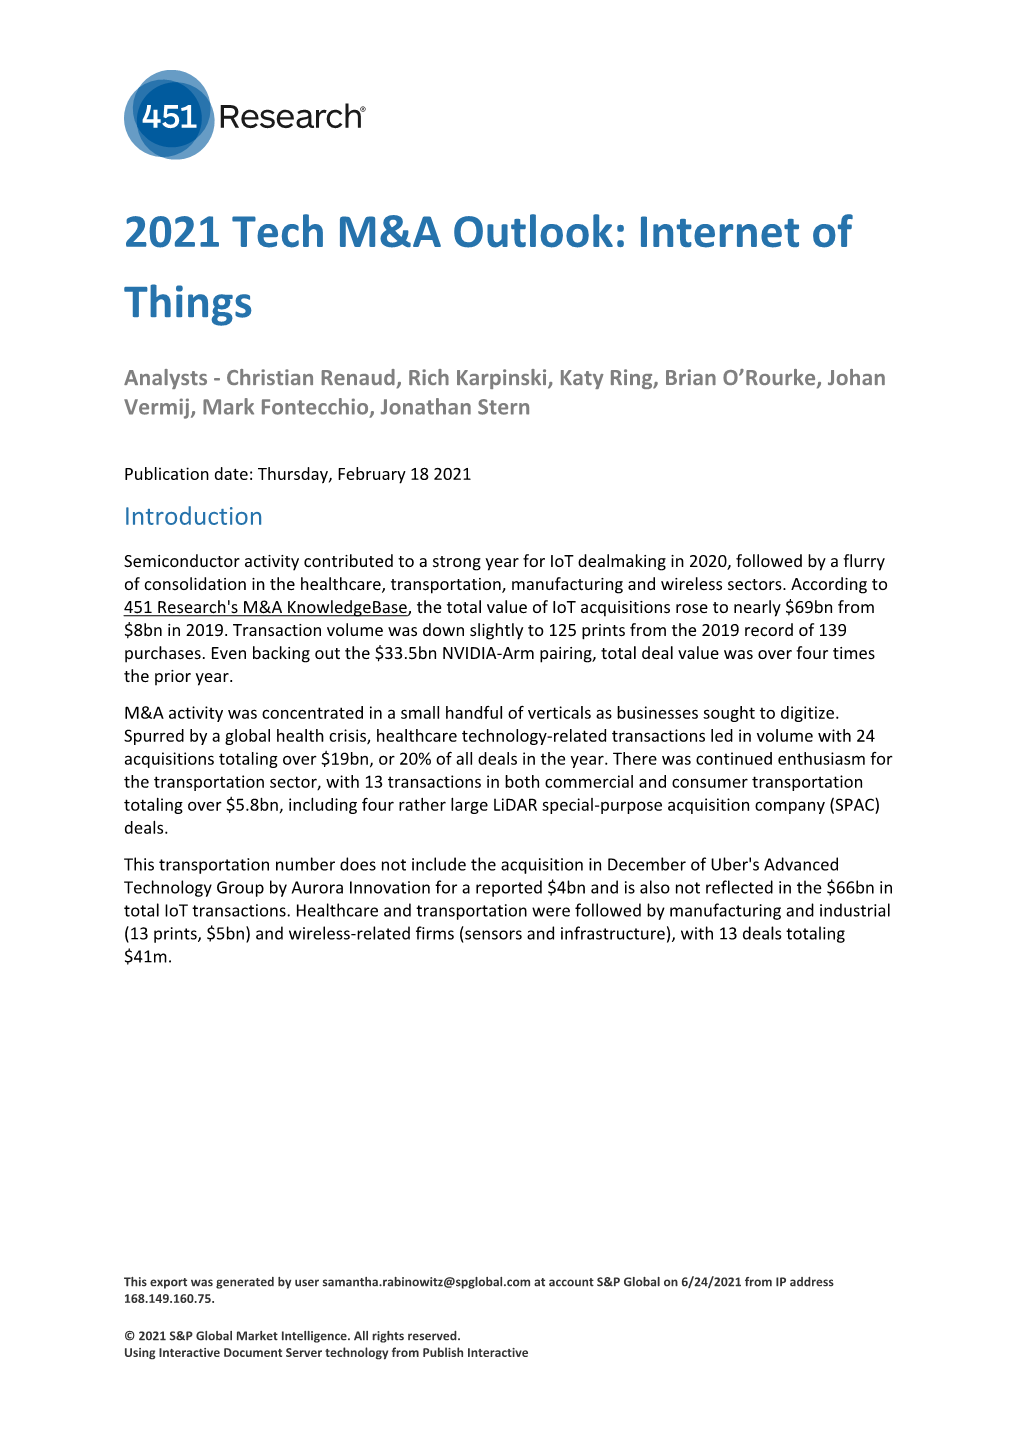 2021 Tech M&A Outlook: Internet of Things